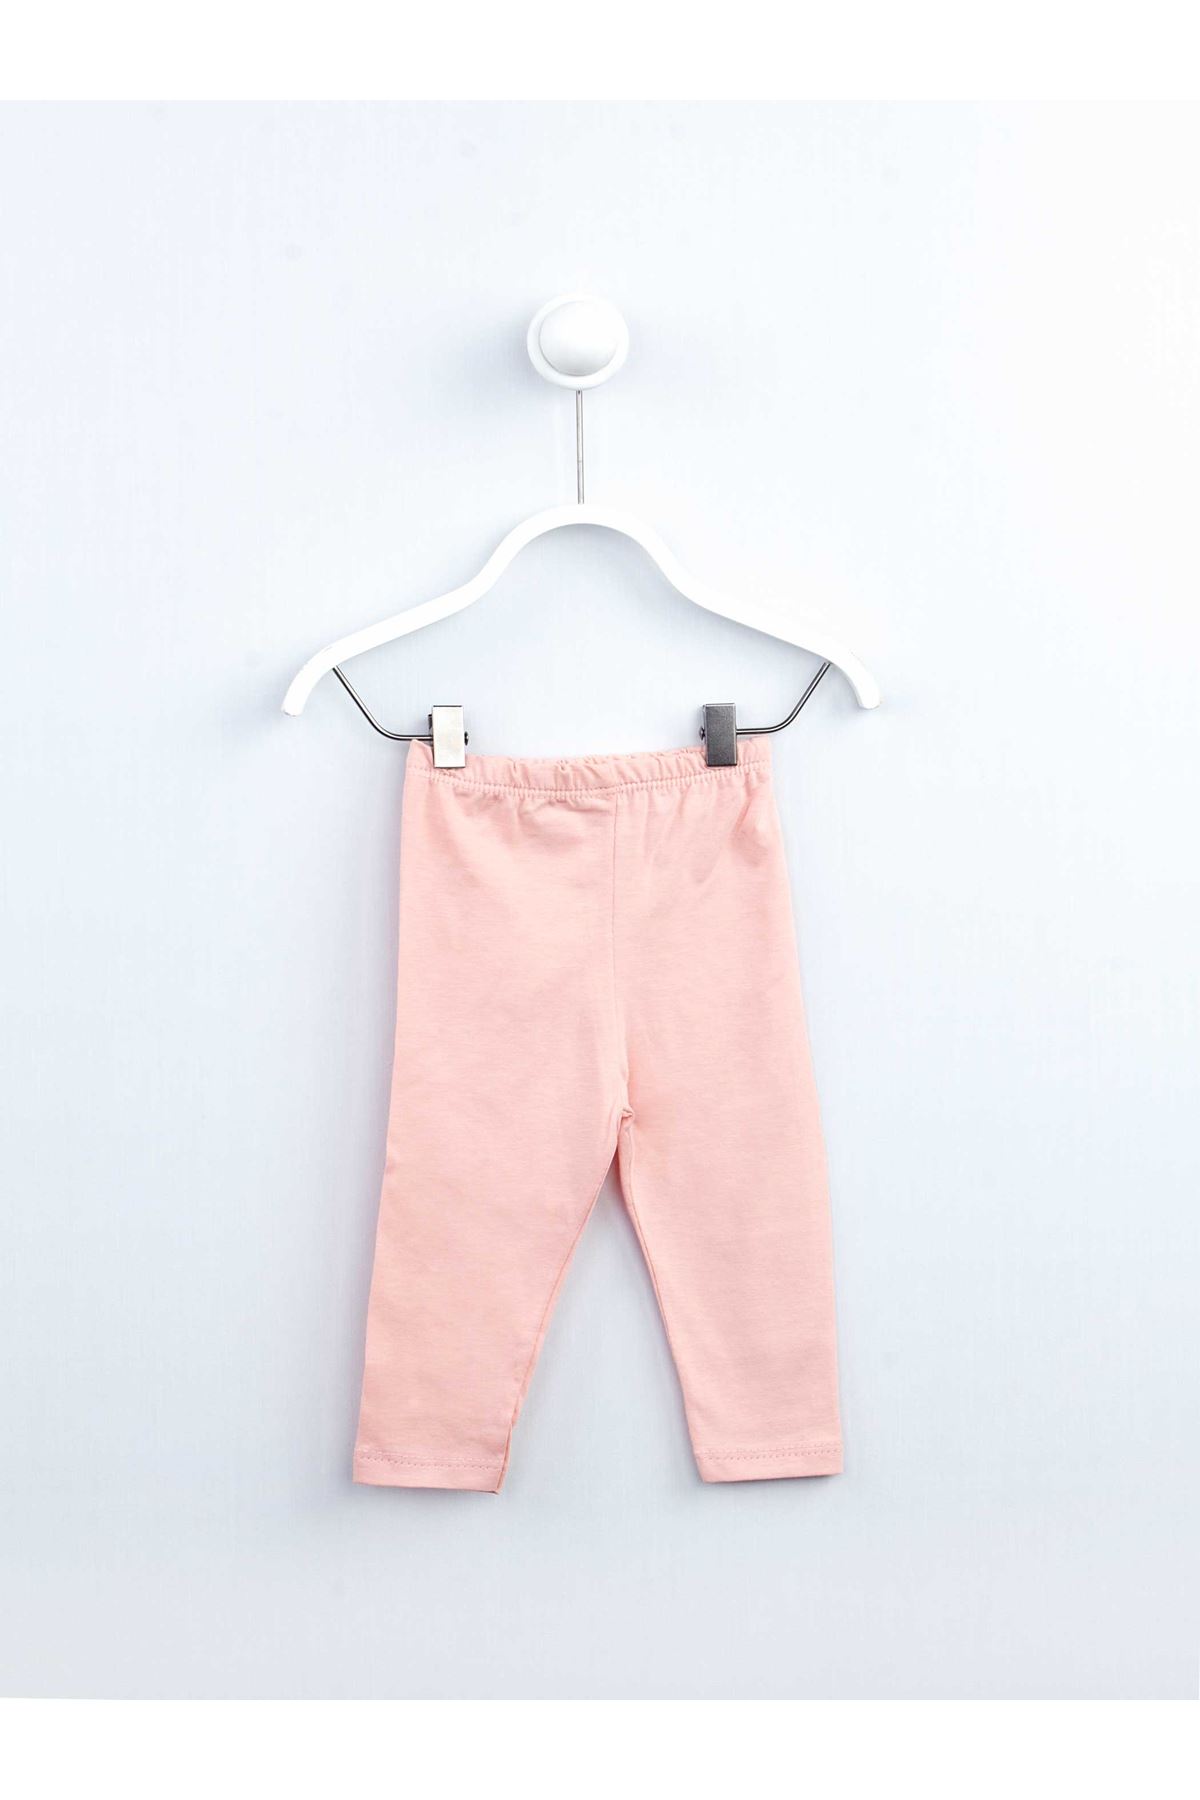 Powder pink Baby Girl Daily 2 Piece Suit Set Cotton Daily Seasonal Casual Wear Girls Babies Suit Outfit Models